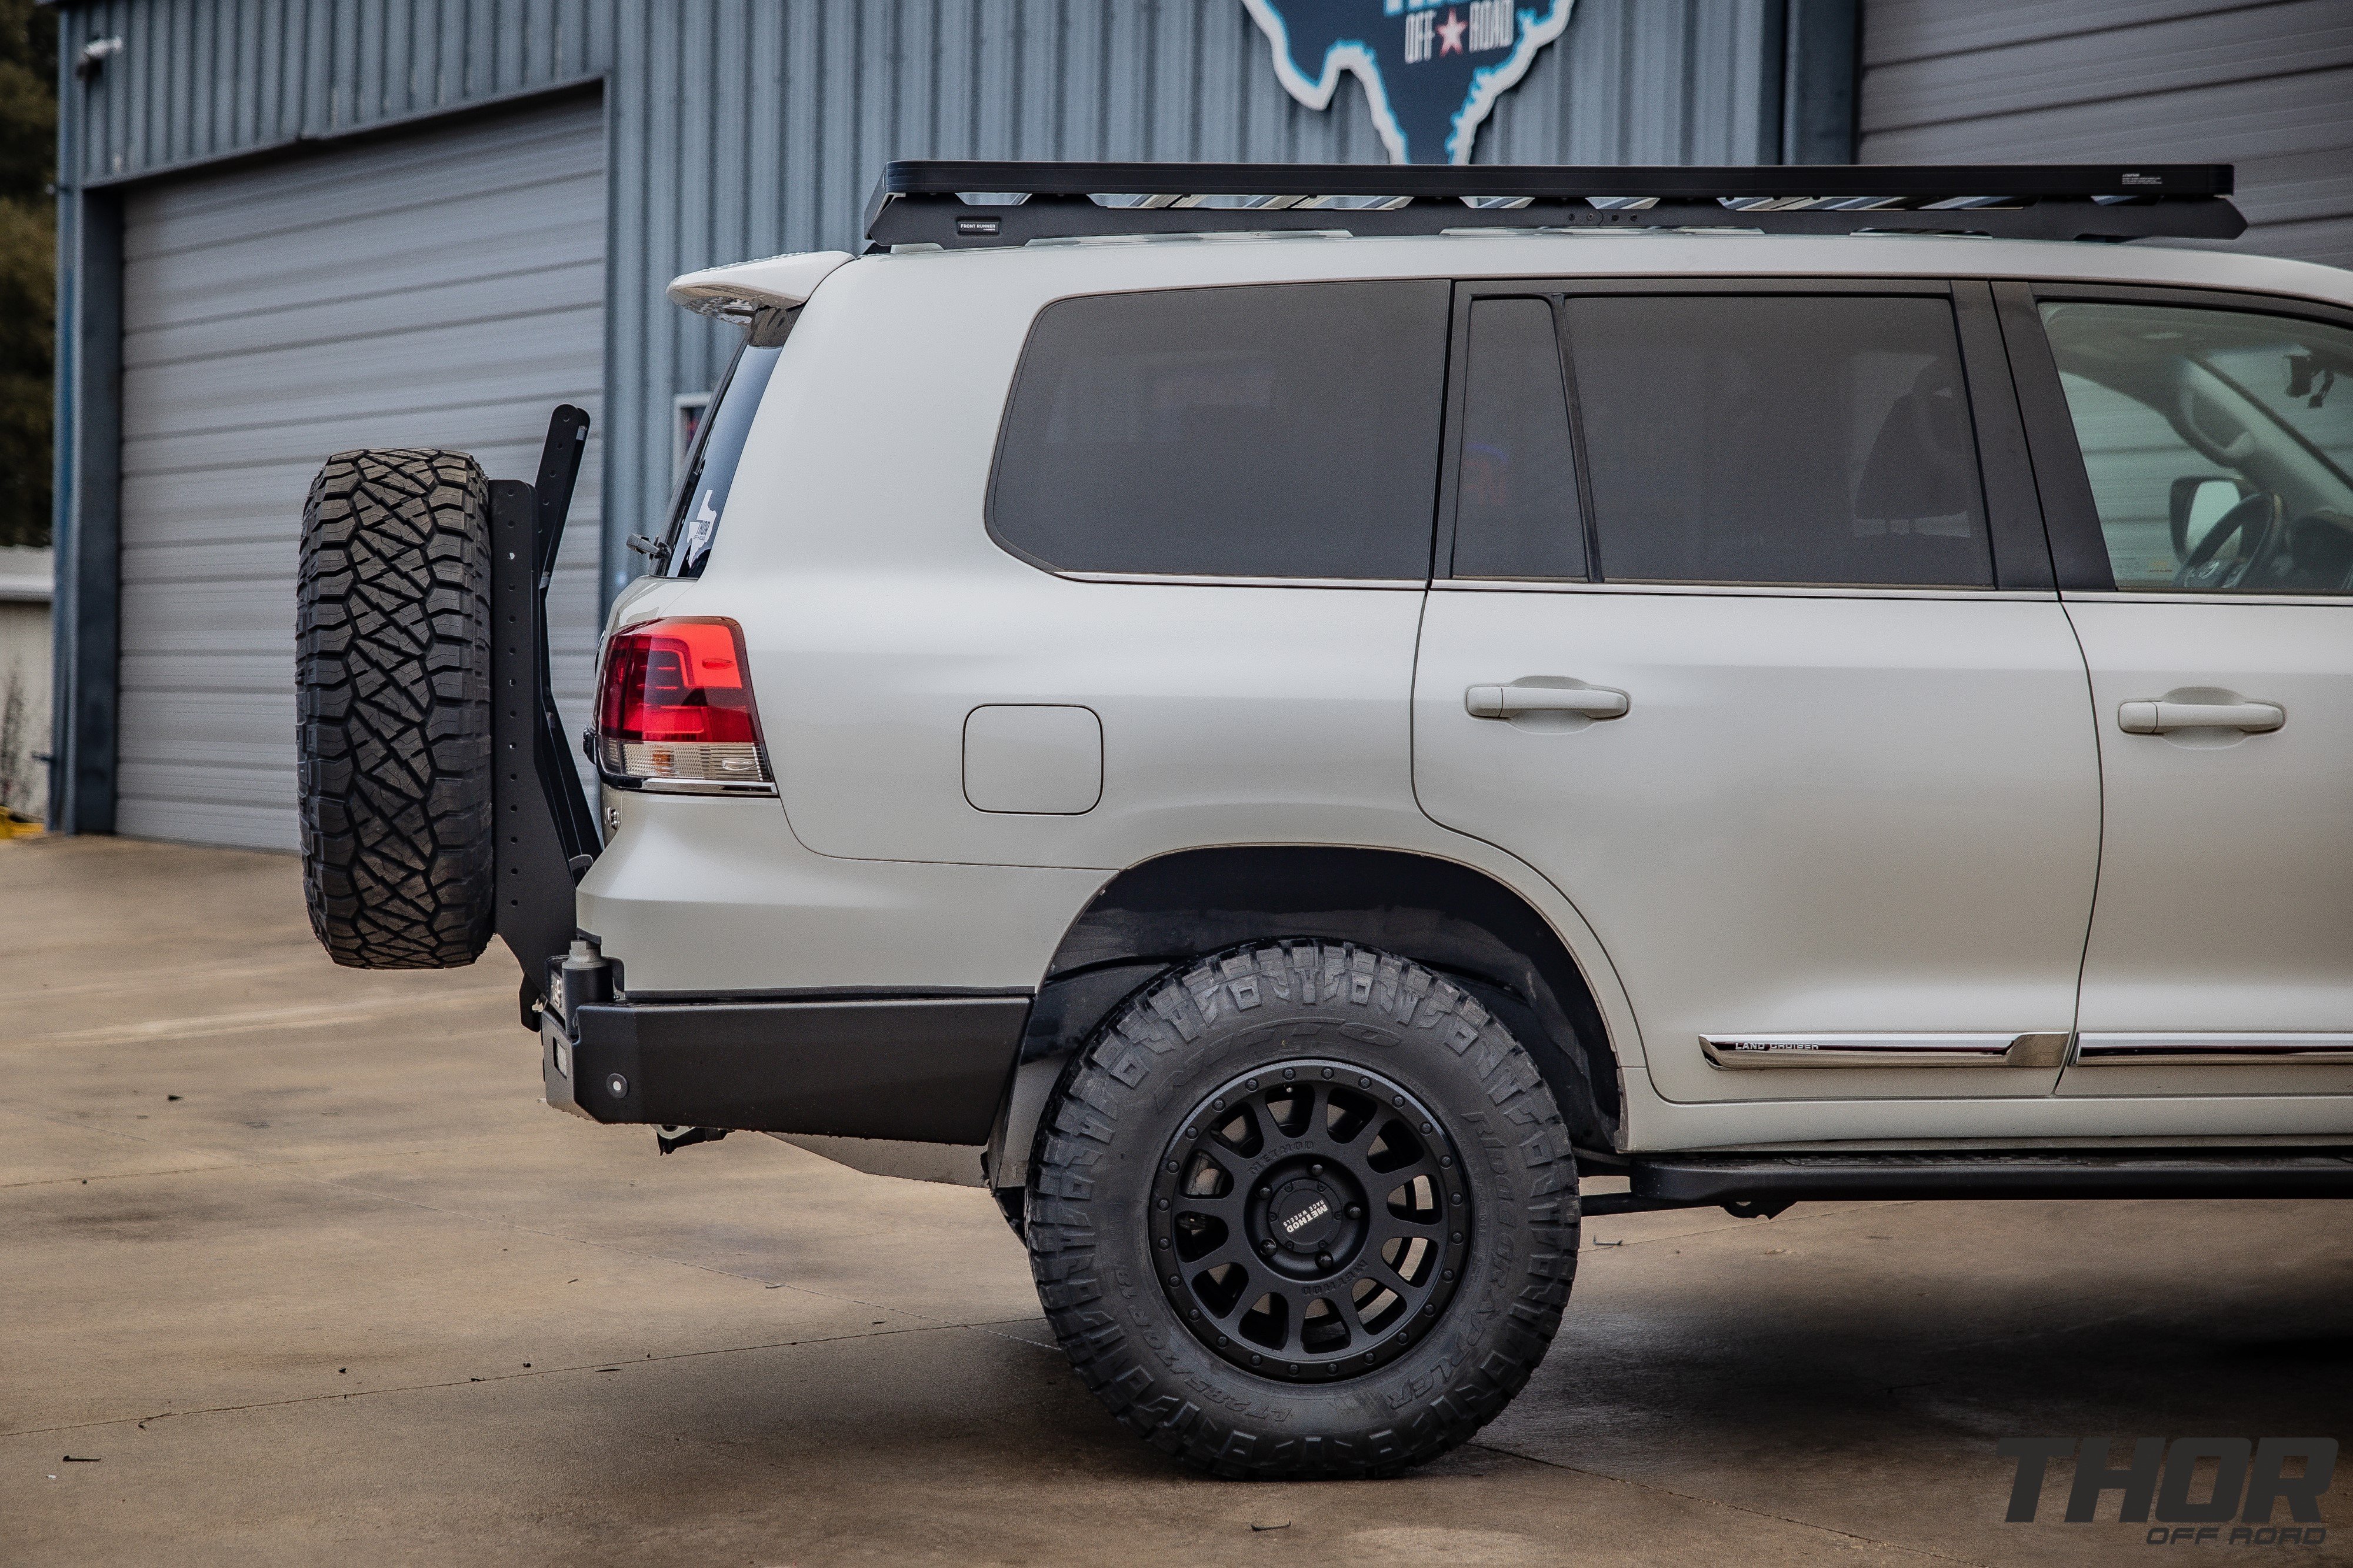 2021 Toyota Land Cruiser in Silver with OME BP-51 Suspension Kit, Method 305 18x9" +25 Wheels, Nitto Ridge Grappler 285/70R18 Tires, Slee Off-Road Front Bumper, Baja Designs S2 Driving Lights, Baja Designs S8 20" Combo Light Bar, Warn Zeon 12S Winch, Slee Off-Road Rear Bumper with Tire Carrier and Roof Rack, Long Range America 40 Gallon Auxillary Fuel Tank, Slee Off-Road Rock Sliders, Front Runner Slimline II Roof Rack Kit. Slee Off-Road Skid Plate System, Slee Off-Road Second Battery System, ARB Twin Compressor Kit